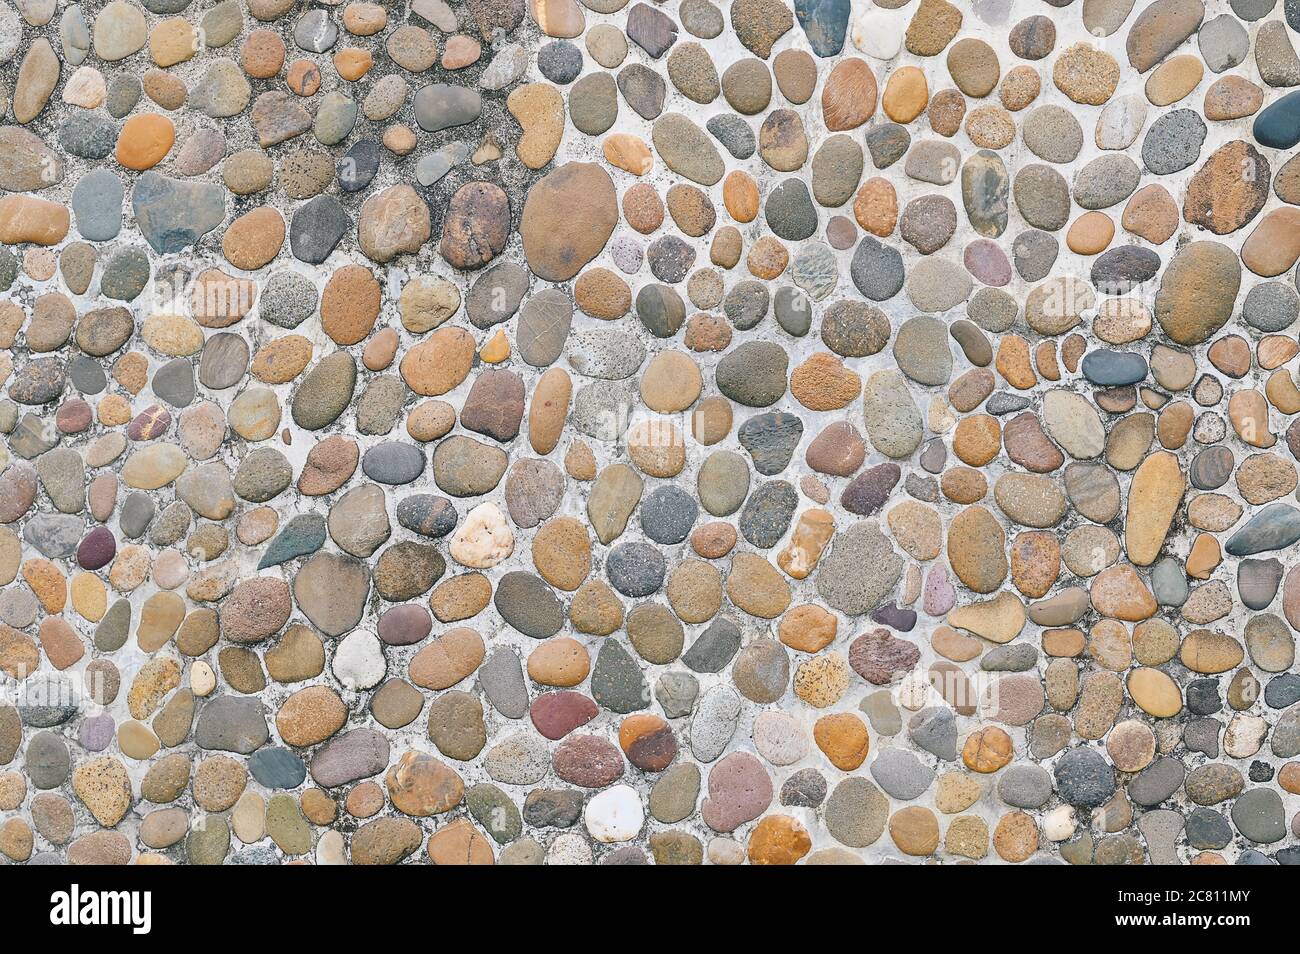 gravel stone wall texture background small stones that have been eroded by water are used to decorate the wall. Stock Photo